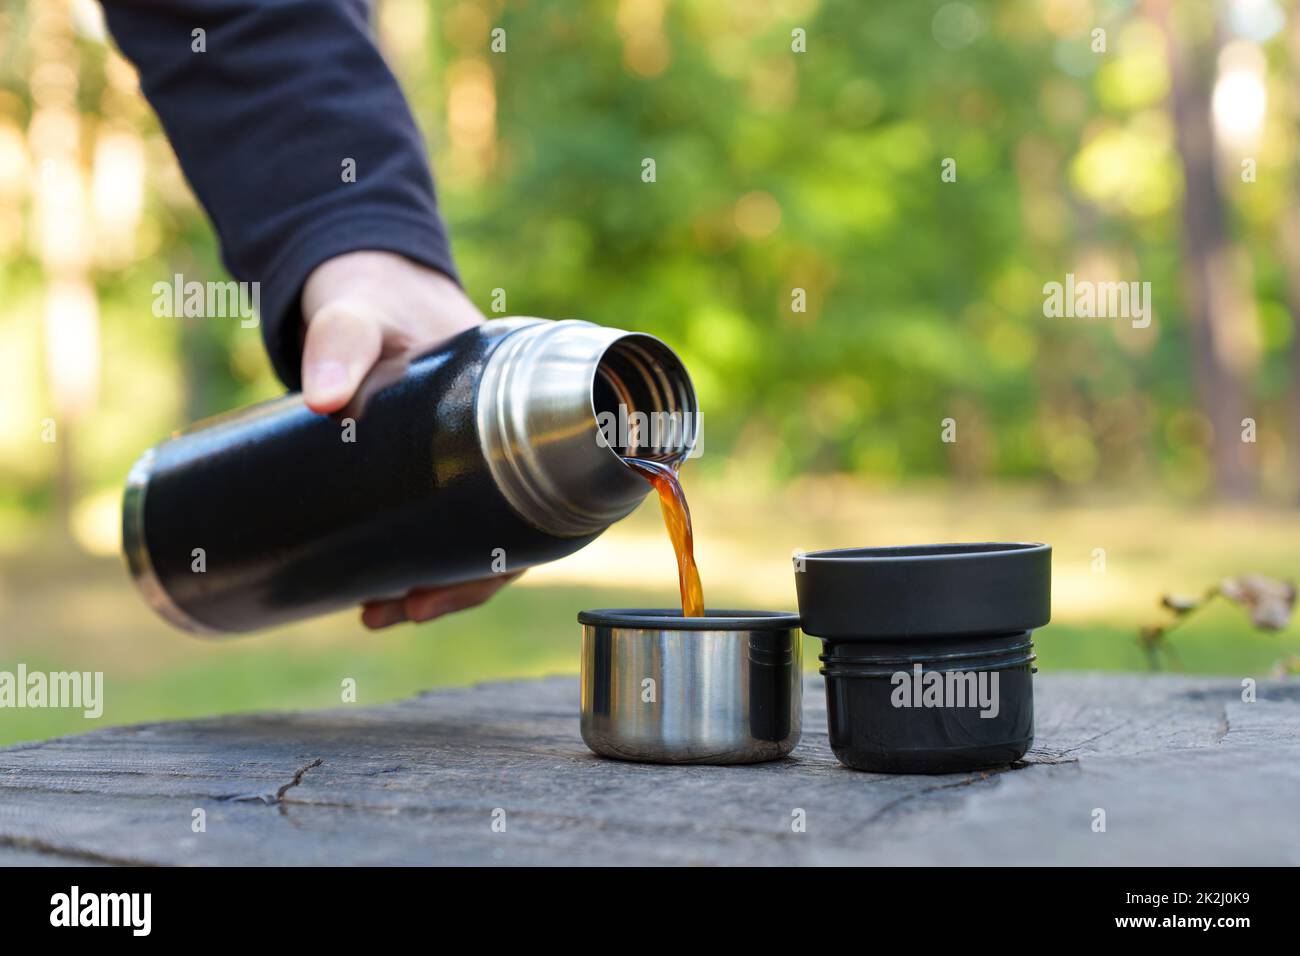 Hand pouring hot coffee from a thermos bottle into a cup placed on a tree stump. Coffee break in the woods. Stock Photo